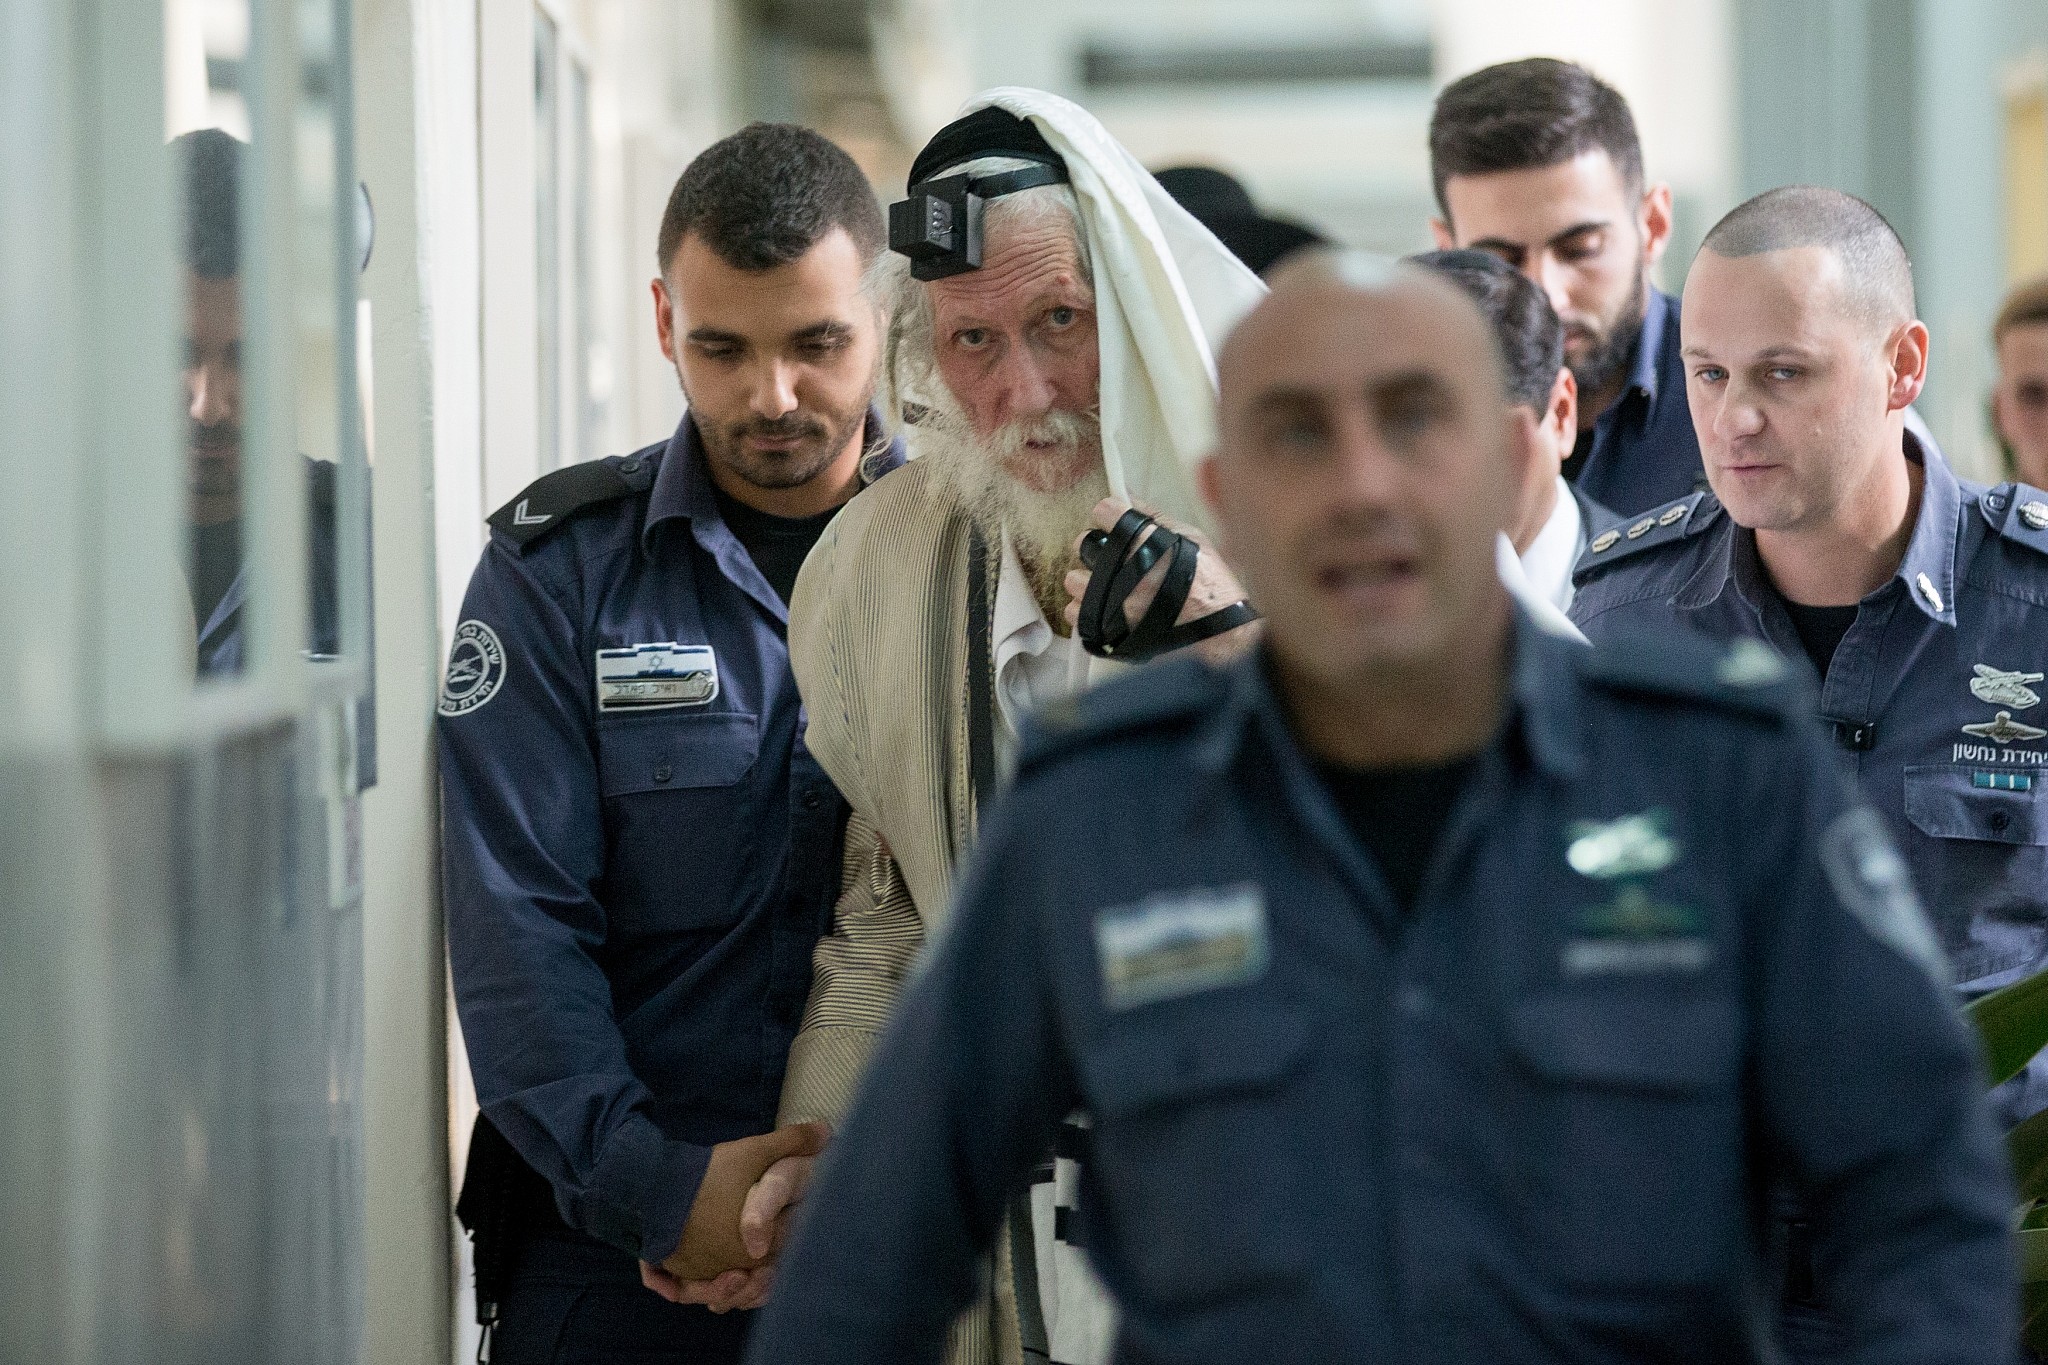 Convicted Sex Offender Rabbi Approved To Make Trip Abroad The Times Of Israel 4611